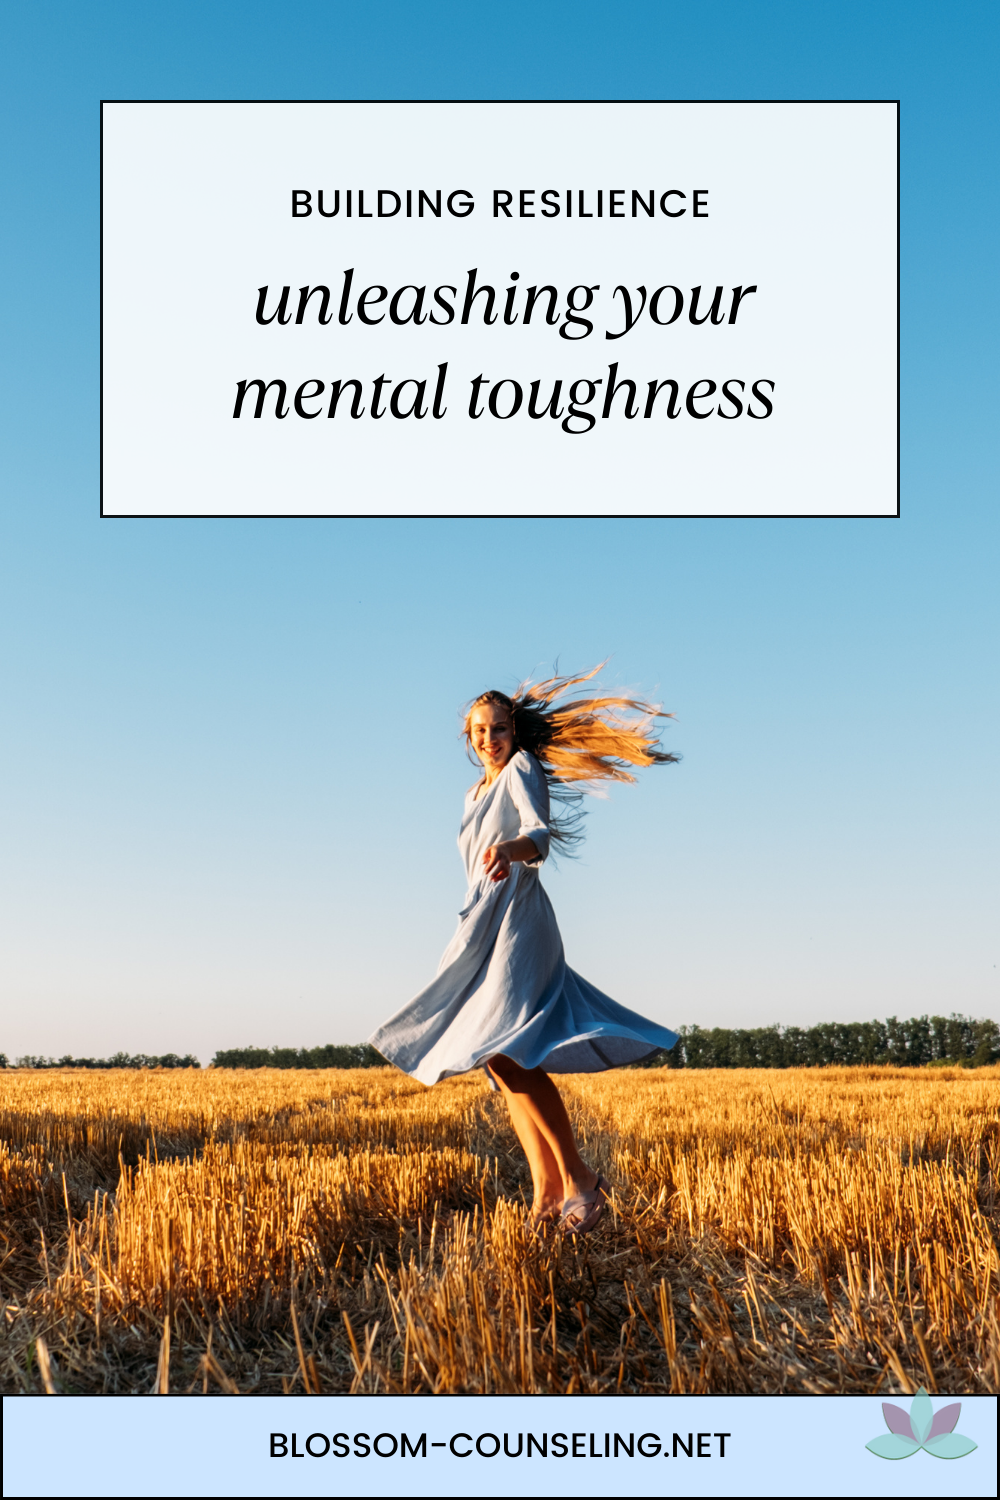 Building Resilience: Unleashing Your Inner Mental Toughness